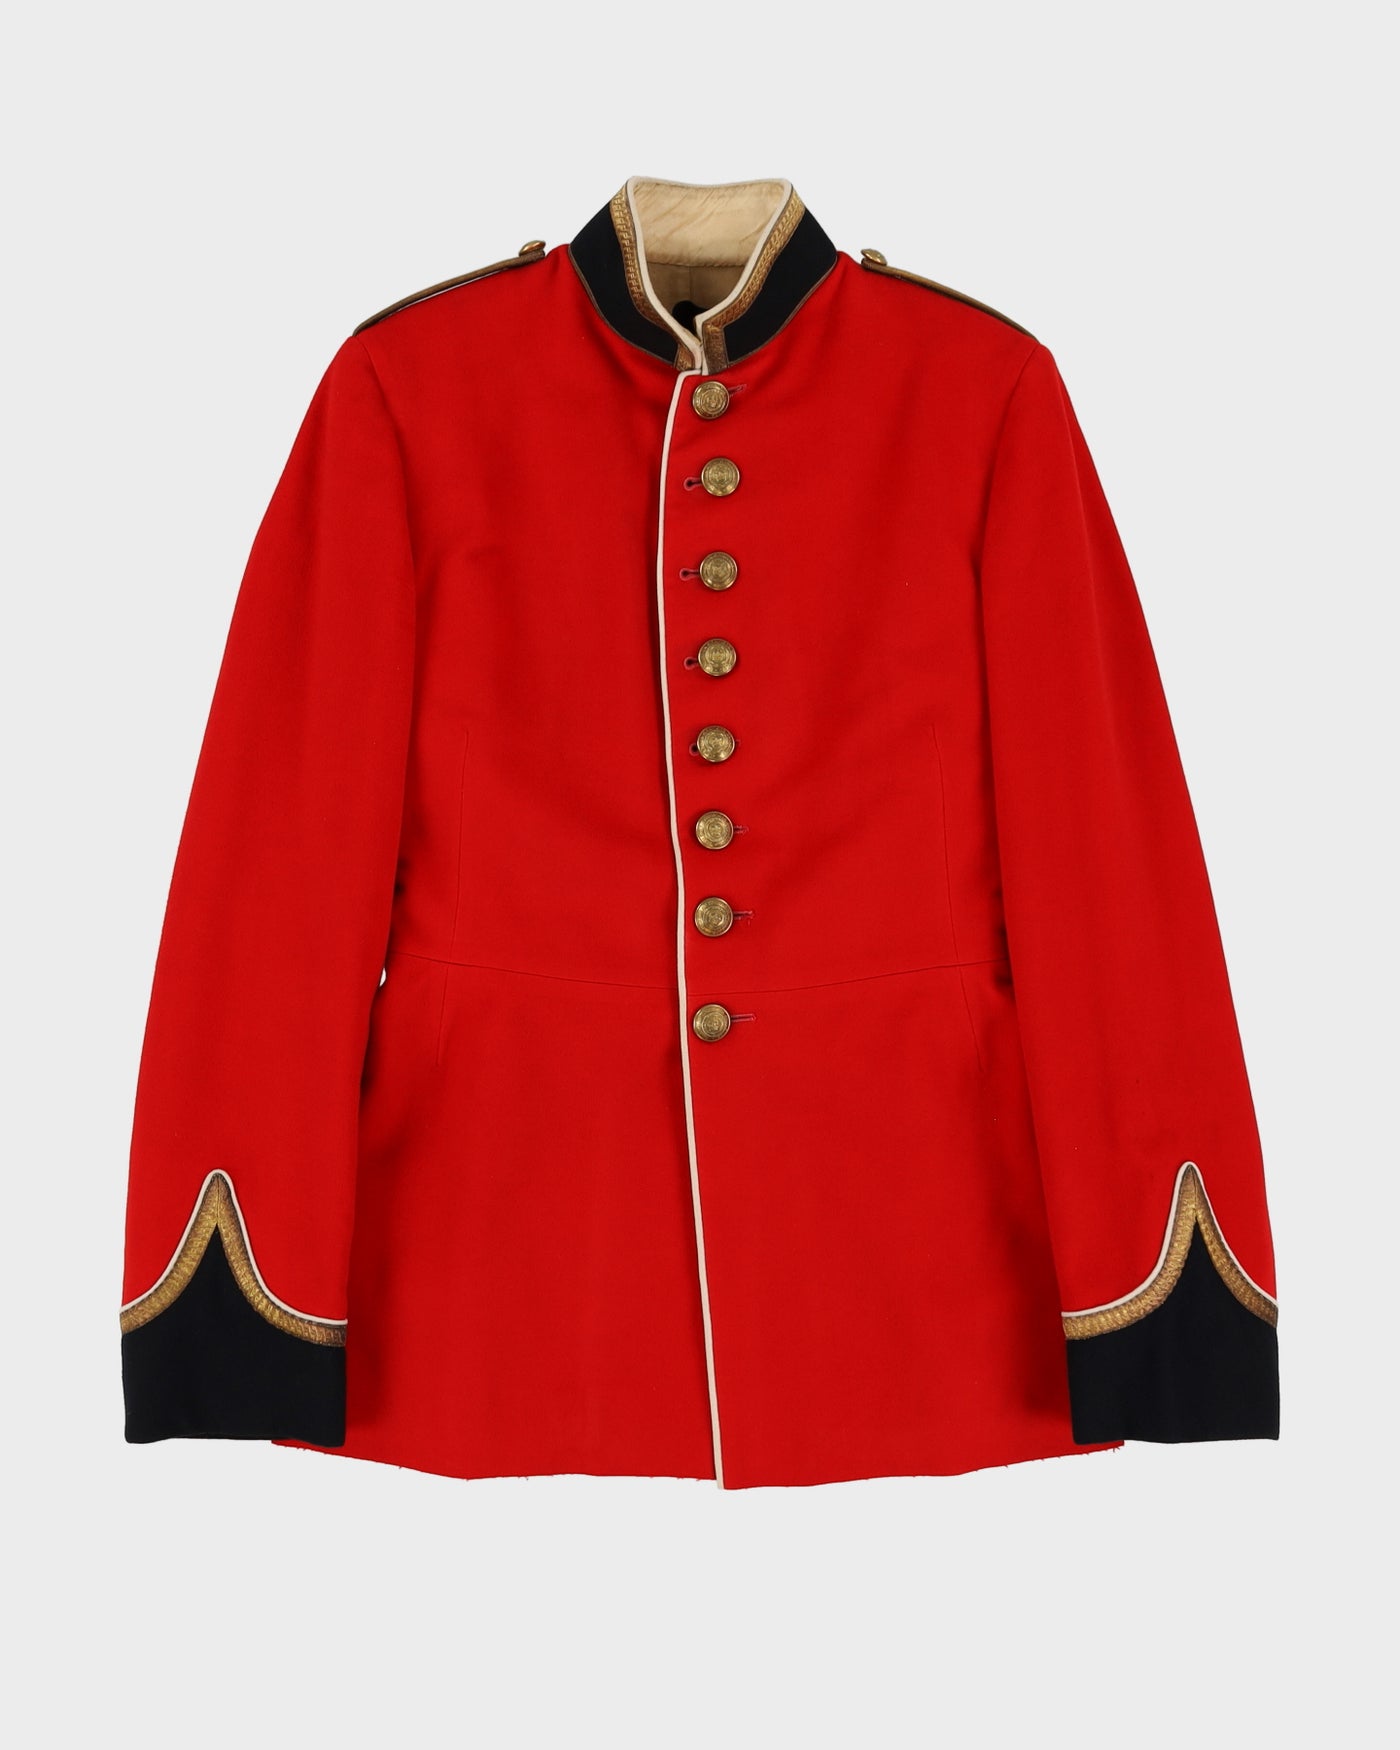 1920s Vintage Canadian Military Officer College Red Coat Dress Jacket - XX-Small